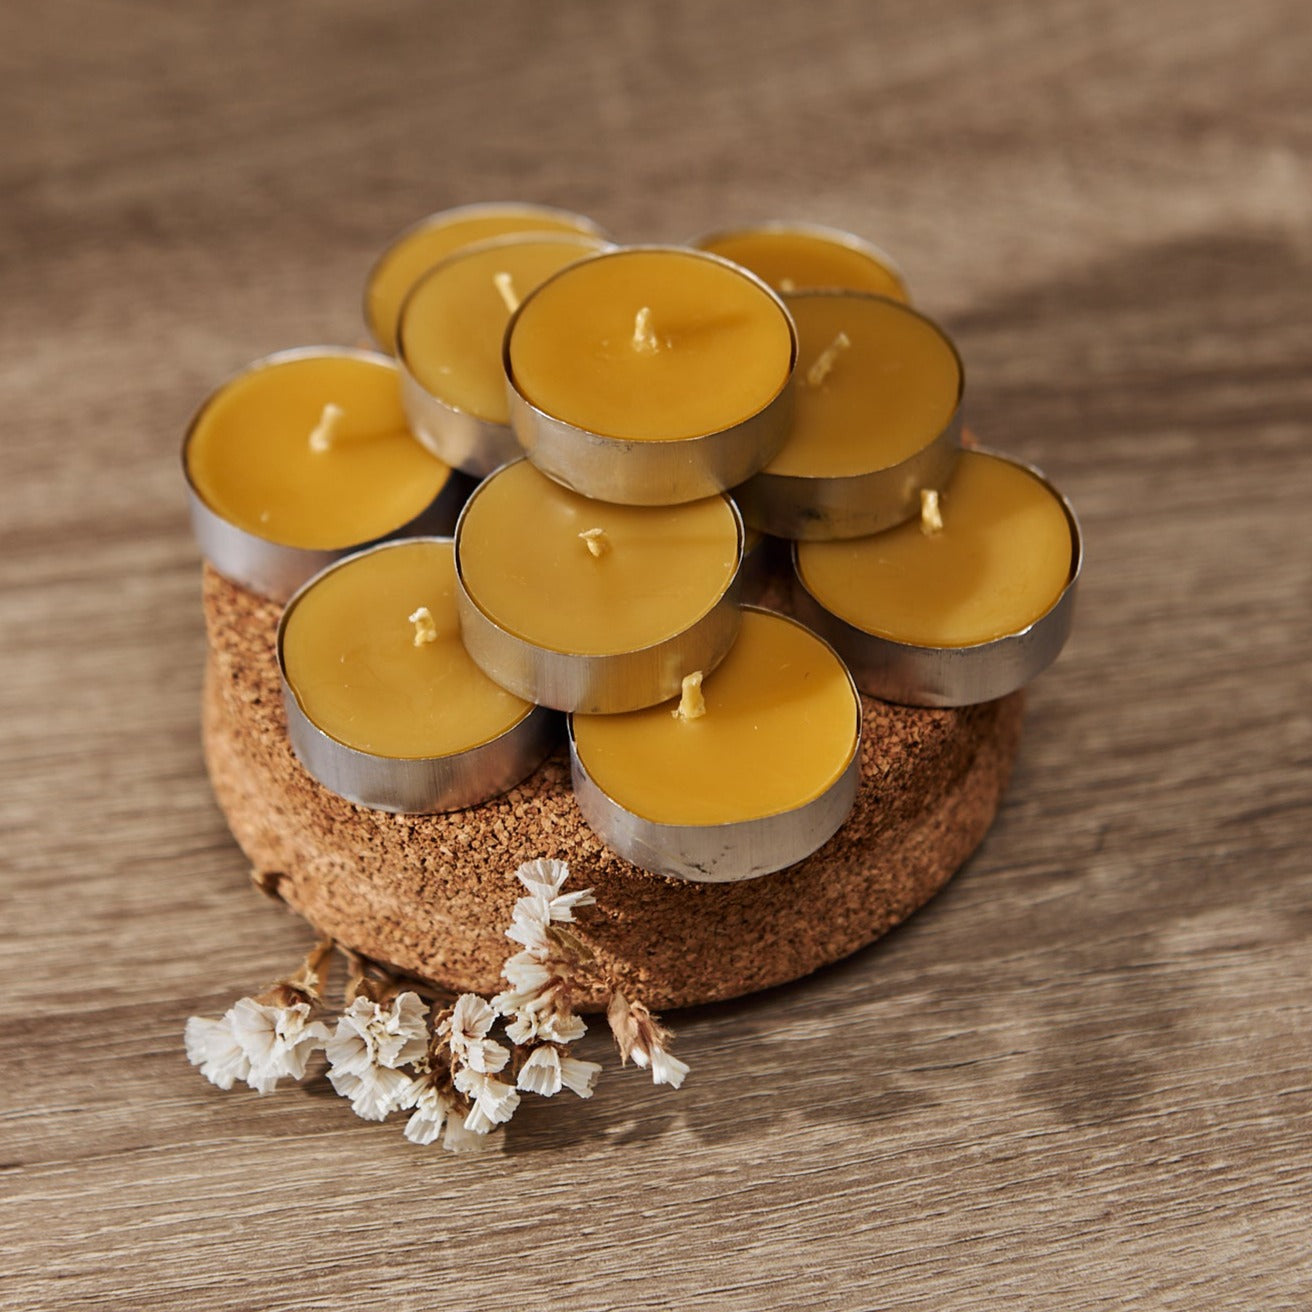 Set of Beeswax Tealight Candles - Smokeless Tealight Candles Lasting 3 Hours - Unscented Tea Lights - Gift for Candle Lovers